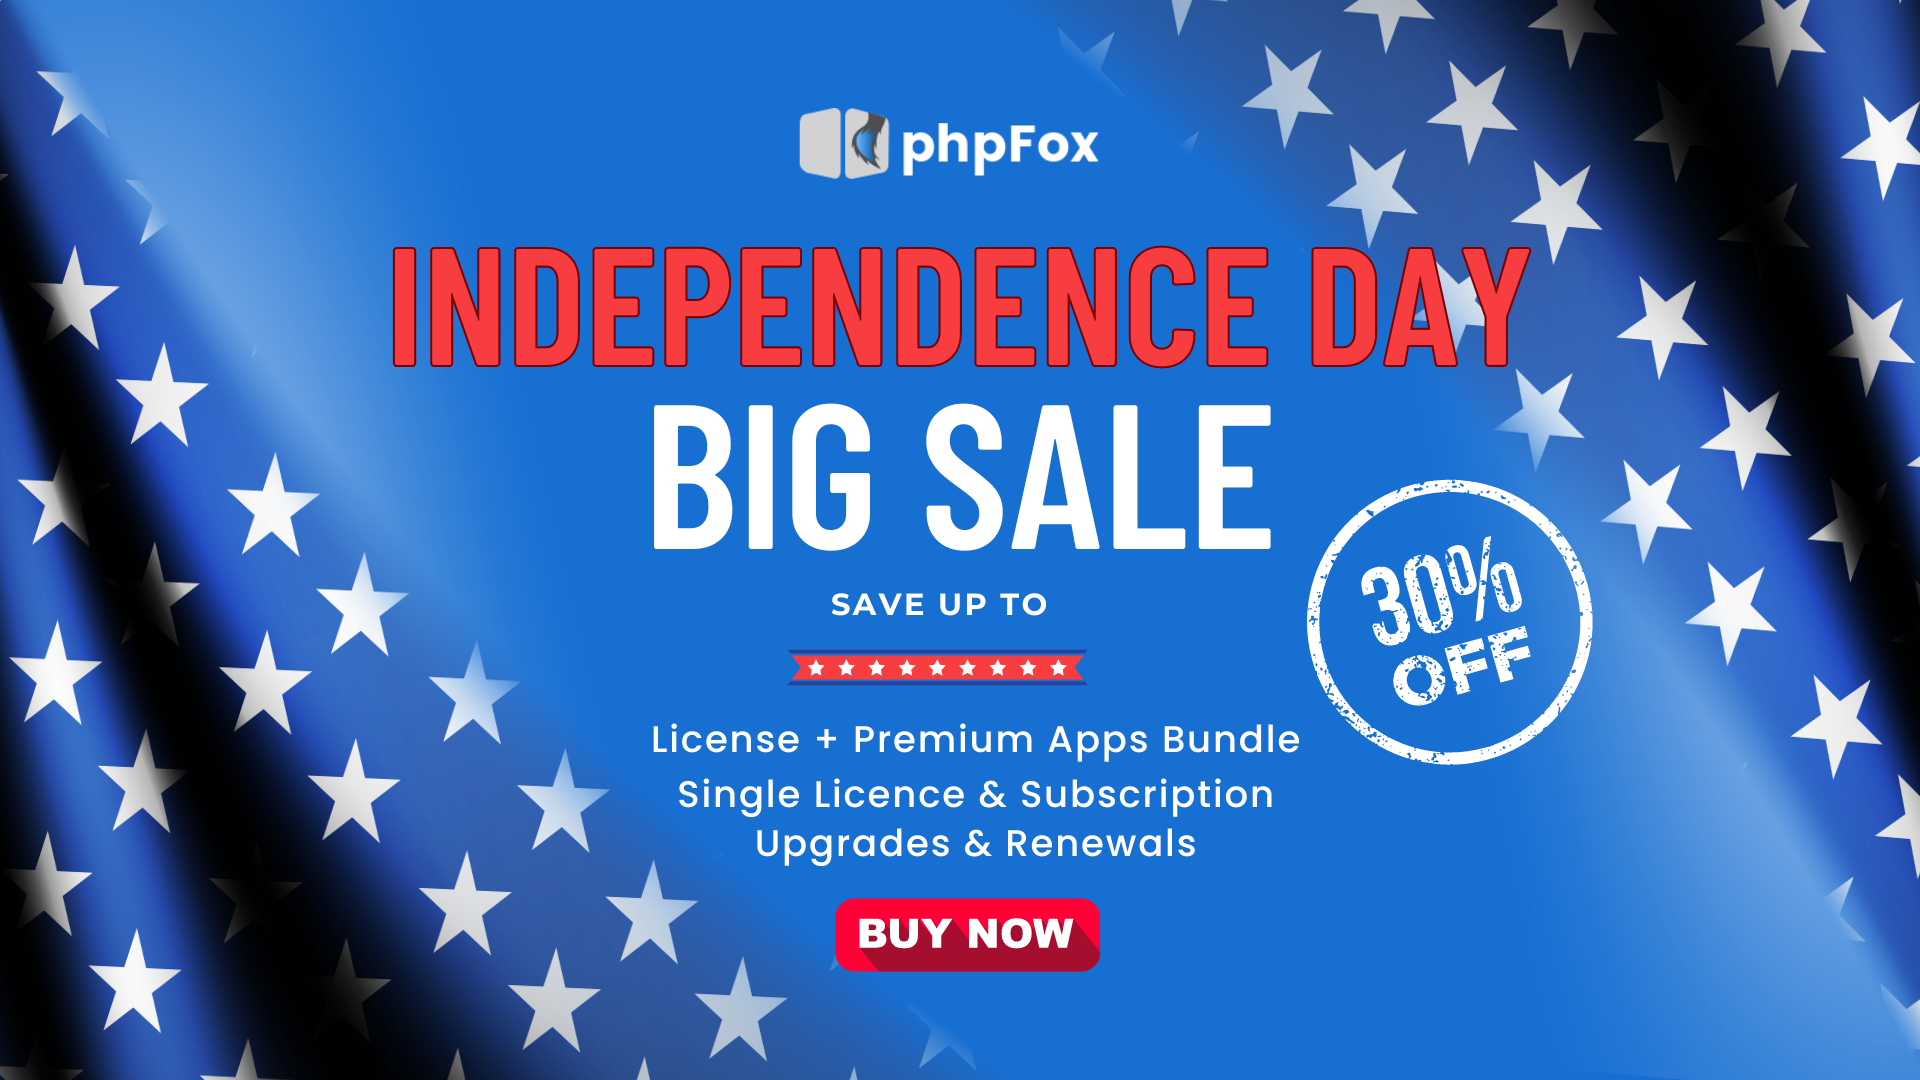 Exclusive Independence Day Deals Inside! 🇺🇸